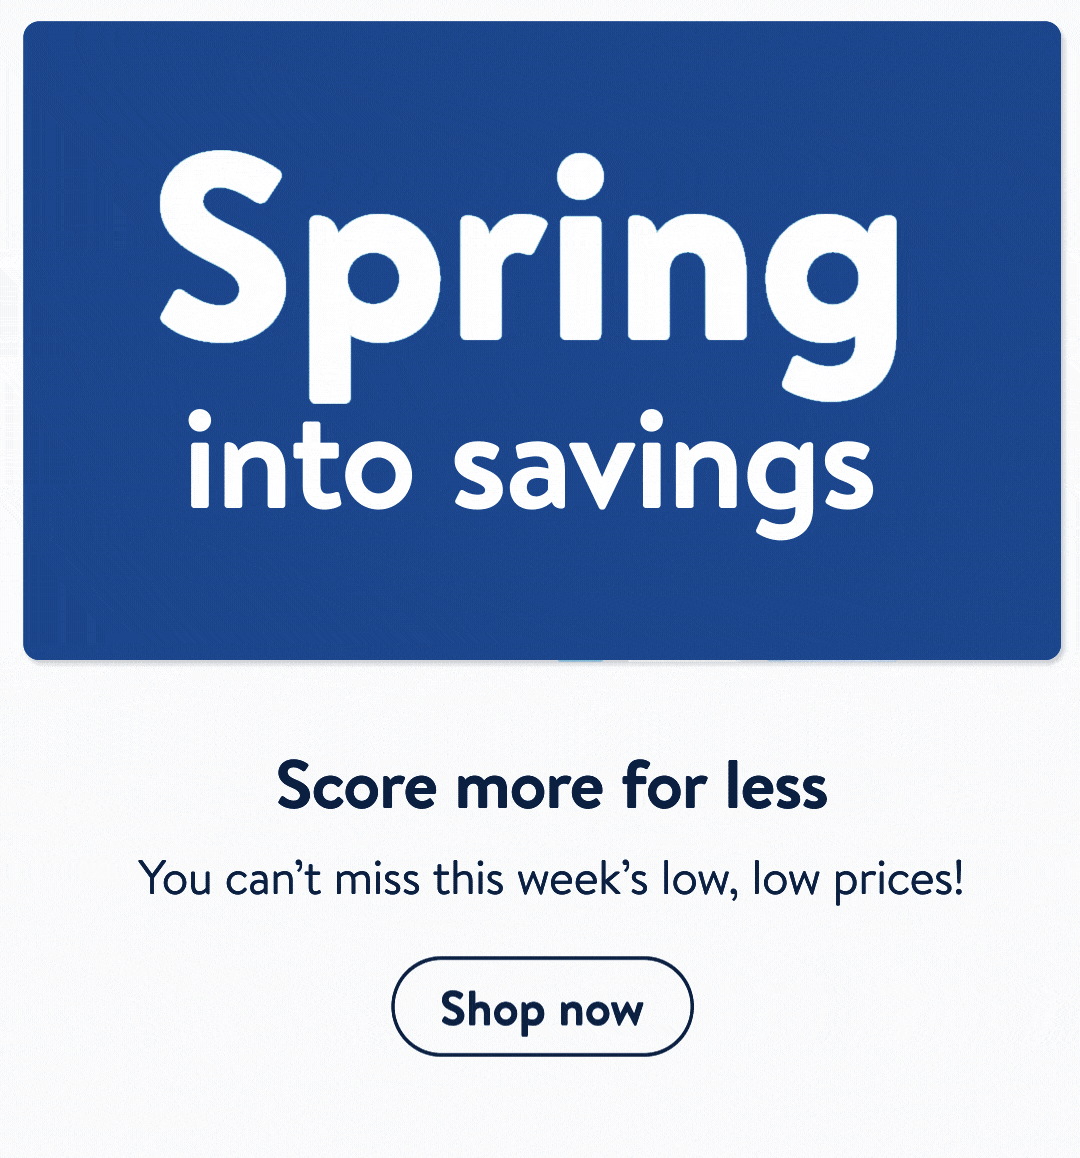 Score more for less